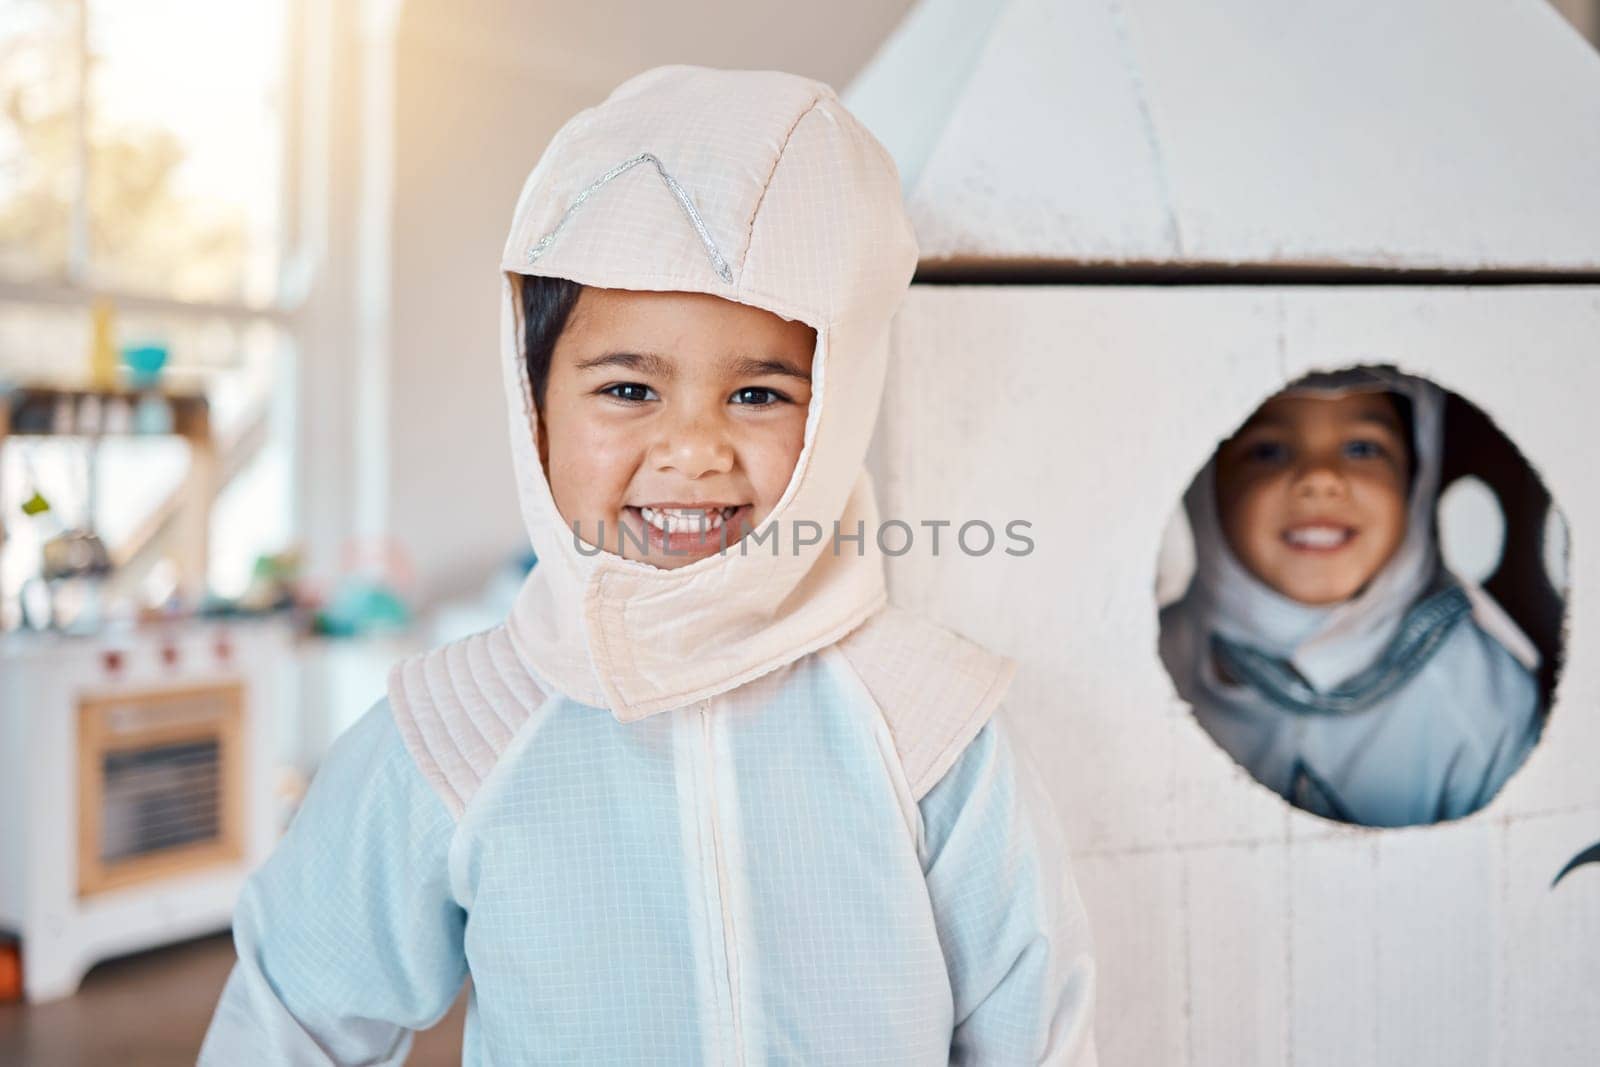 Astronaut portrait, spaceship and children happy, playing and role play space travel, home fantasy games or pretend rocket. Explore universe, Halloween costume and youth kids imagine galaxy adventure by YuriArcurs